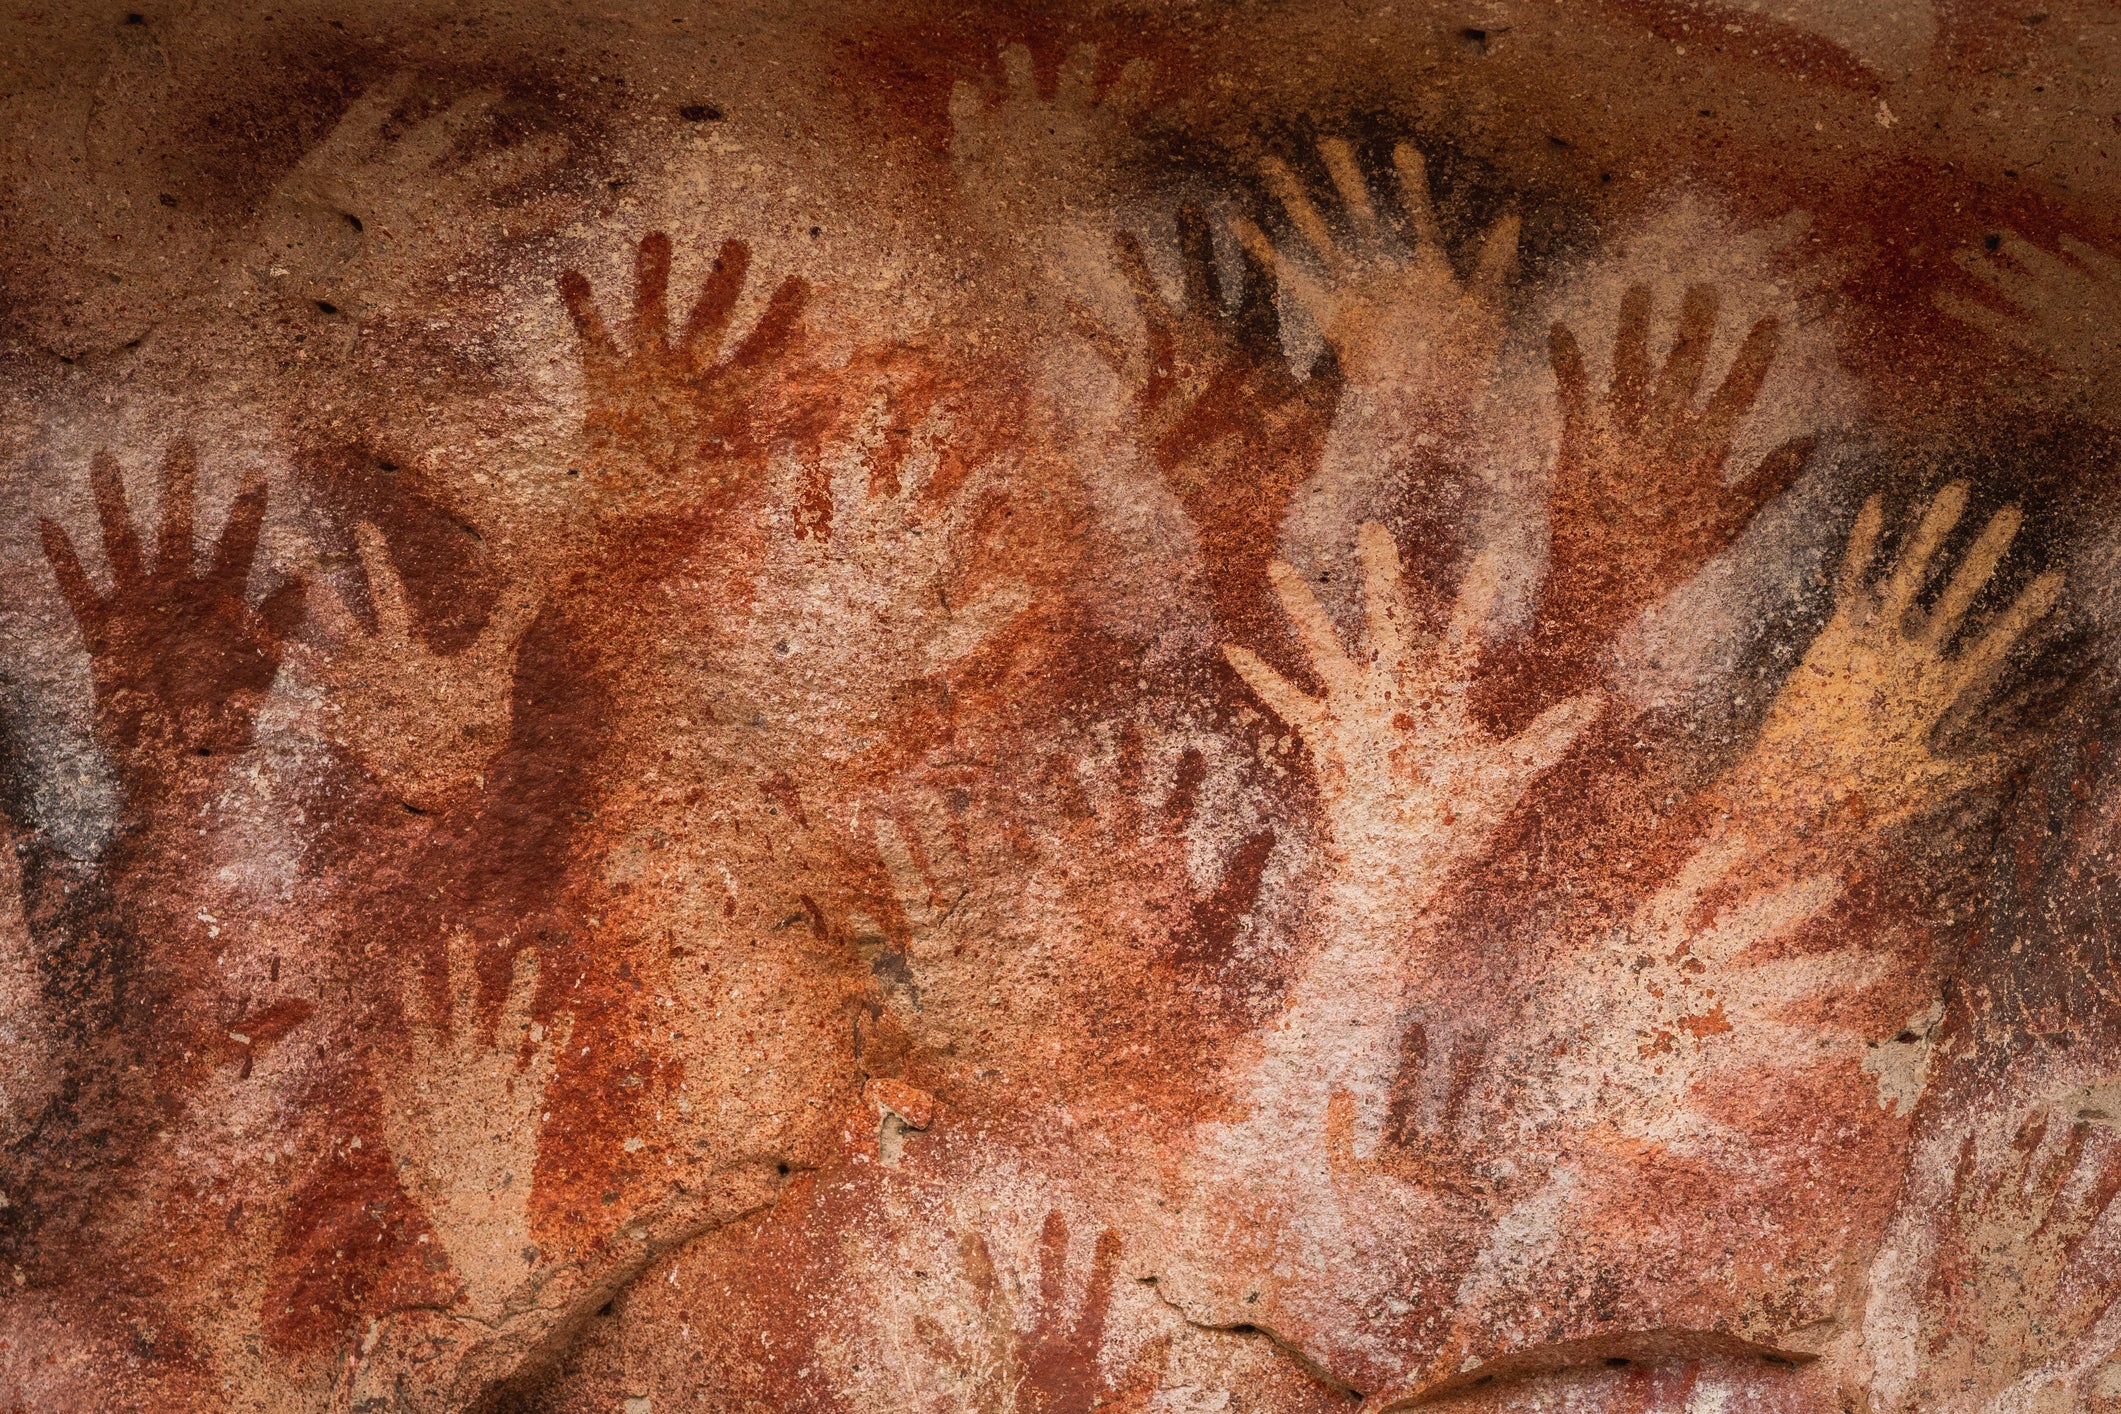 Prehistoric hand paintings at the Cave of Hands in Argentina, thought to be over 10,000 years old